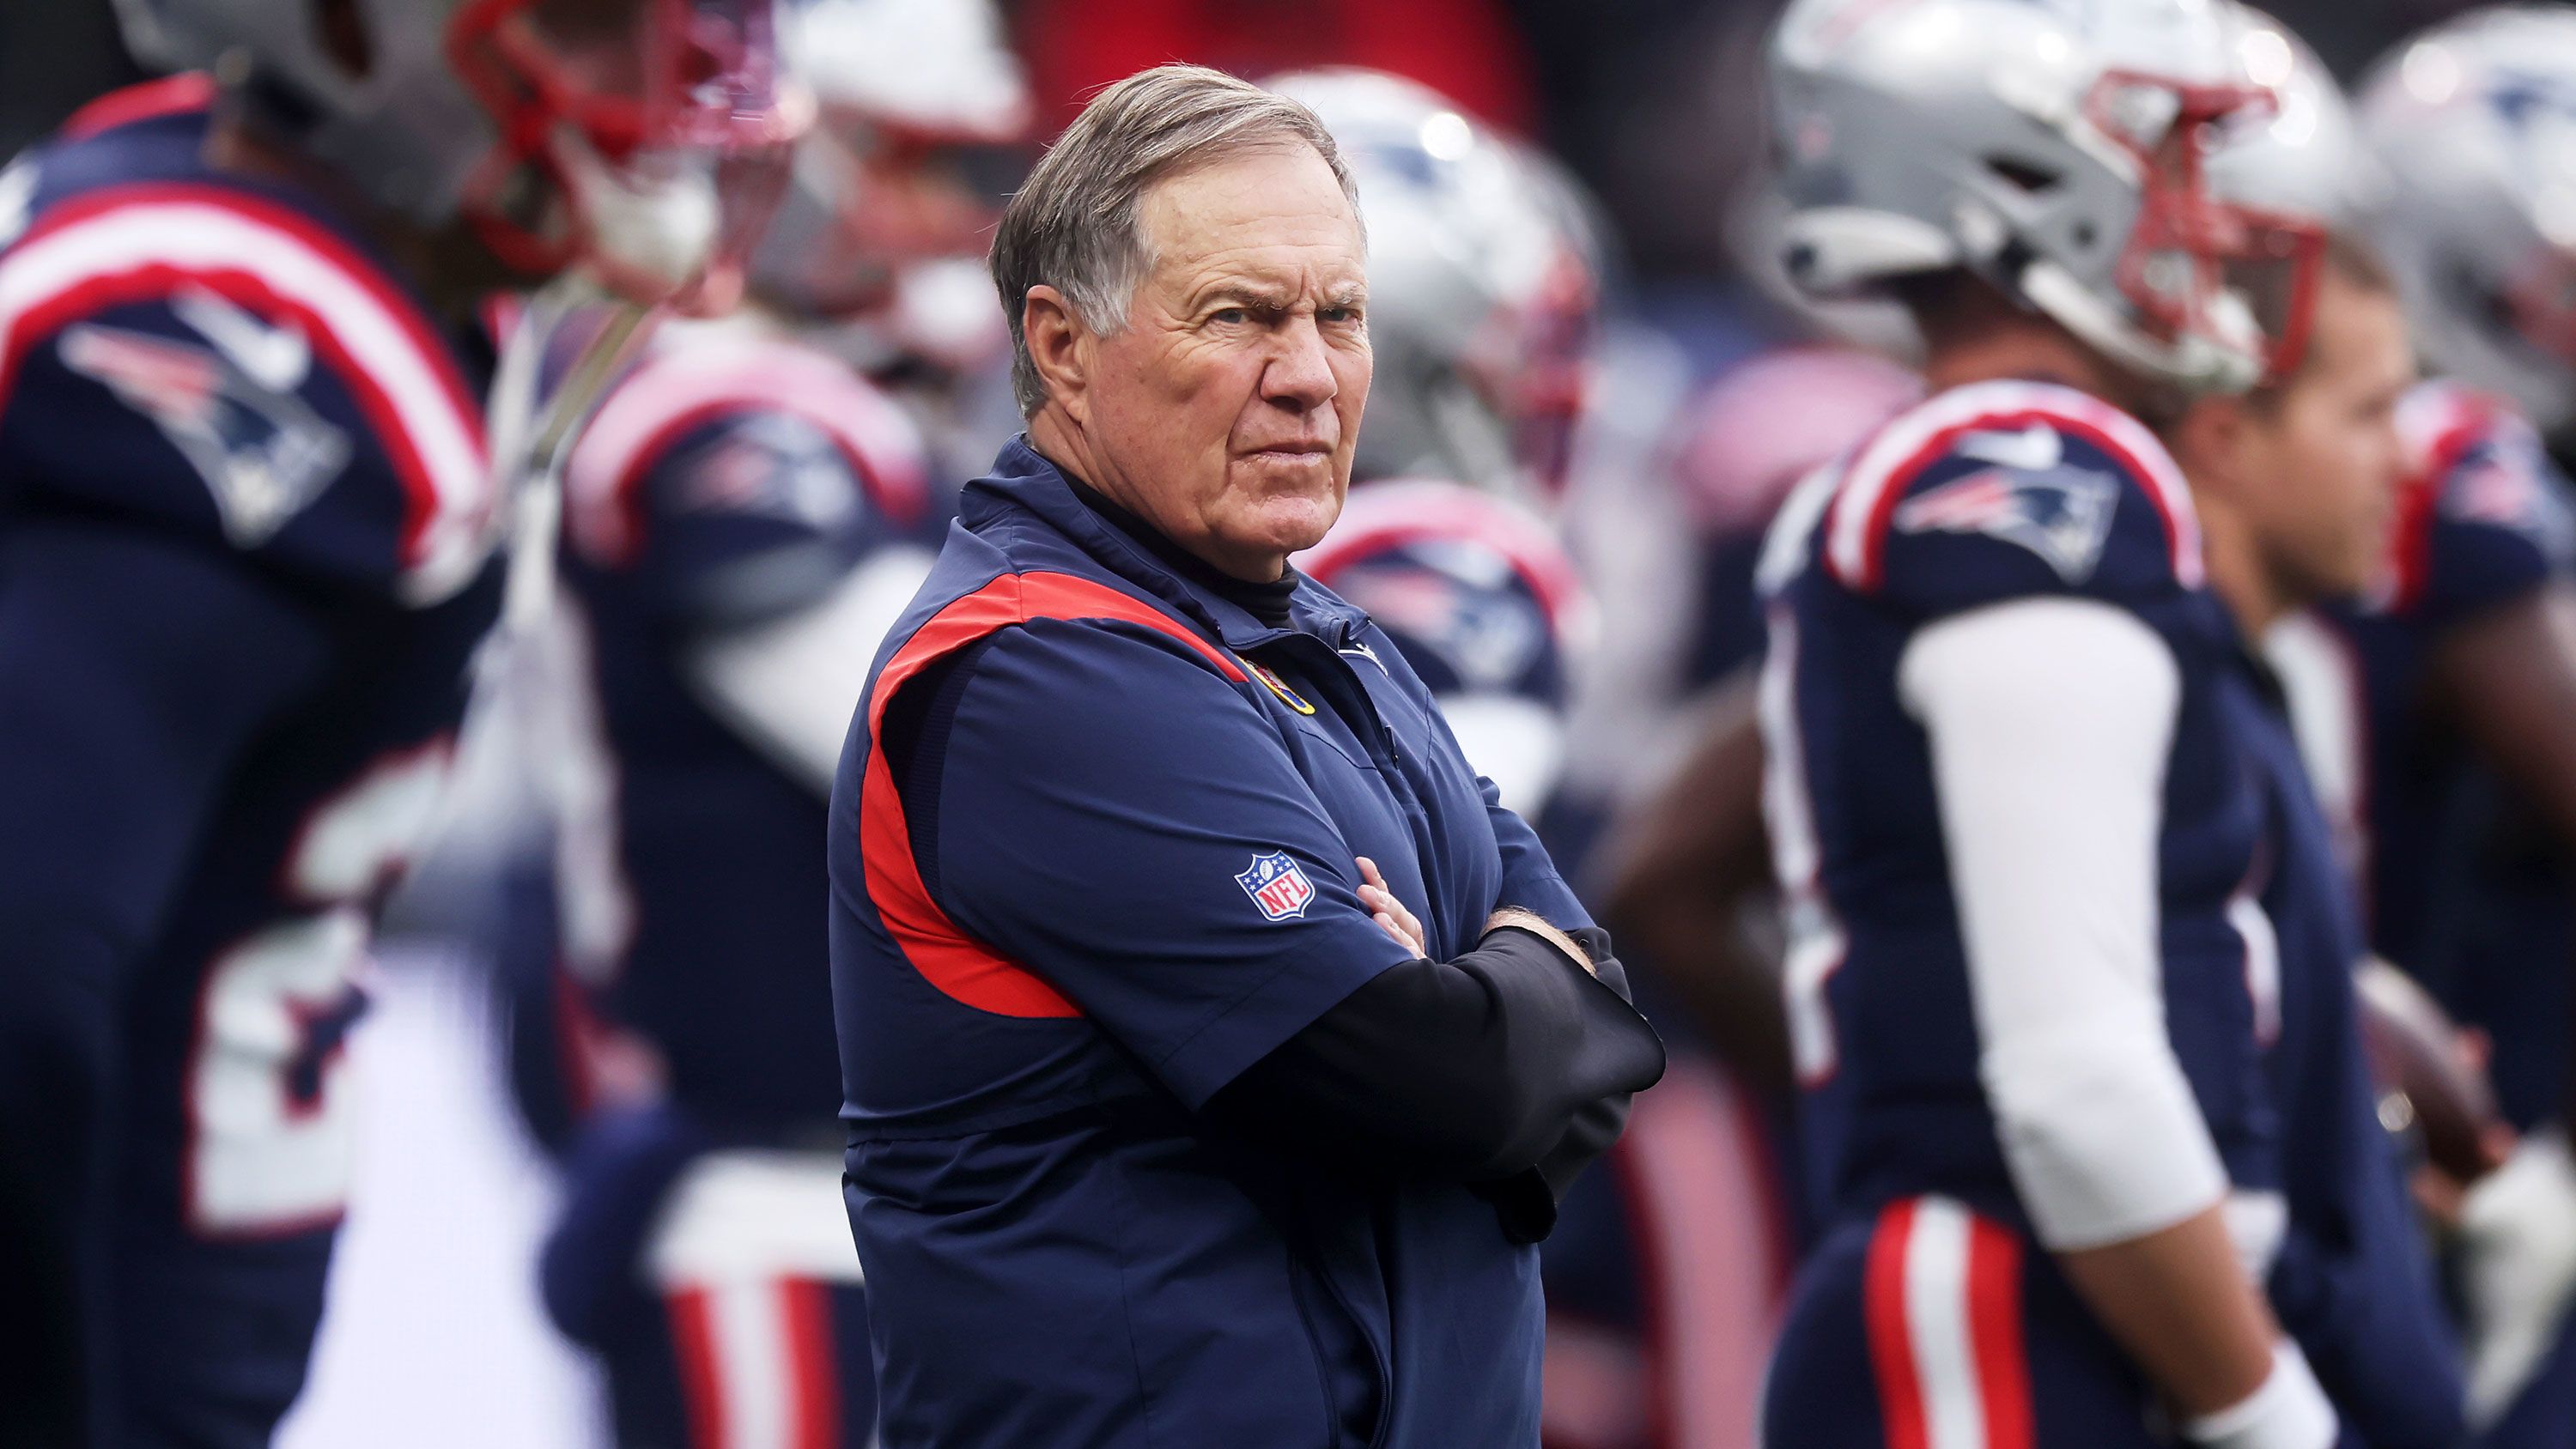 Bill Belichick: Legendary NFL coach says it's 'way too early' to make decision on future with New England Patriots | CNN